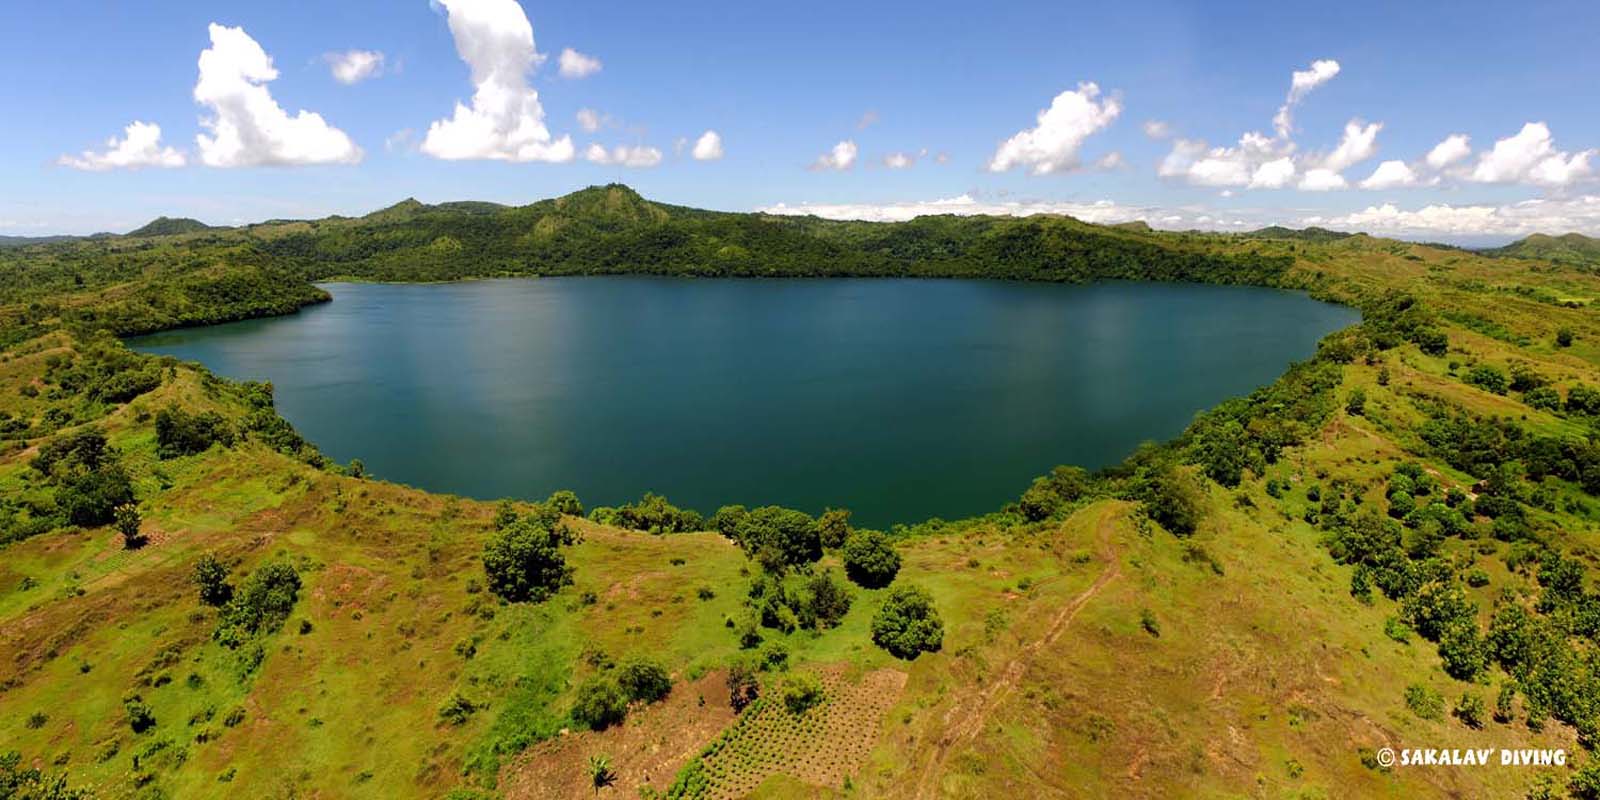 Hiking excursions to enjoy landscapes in Nosy Be